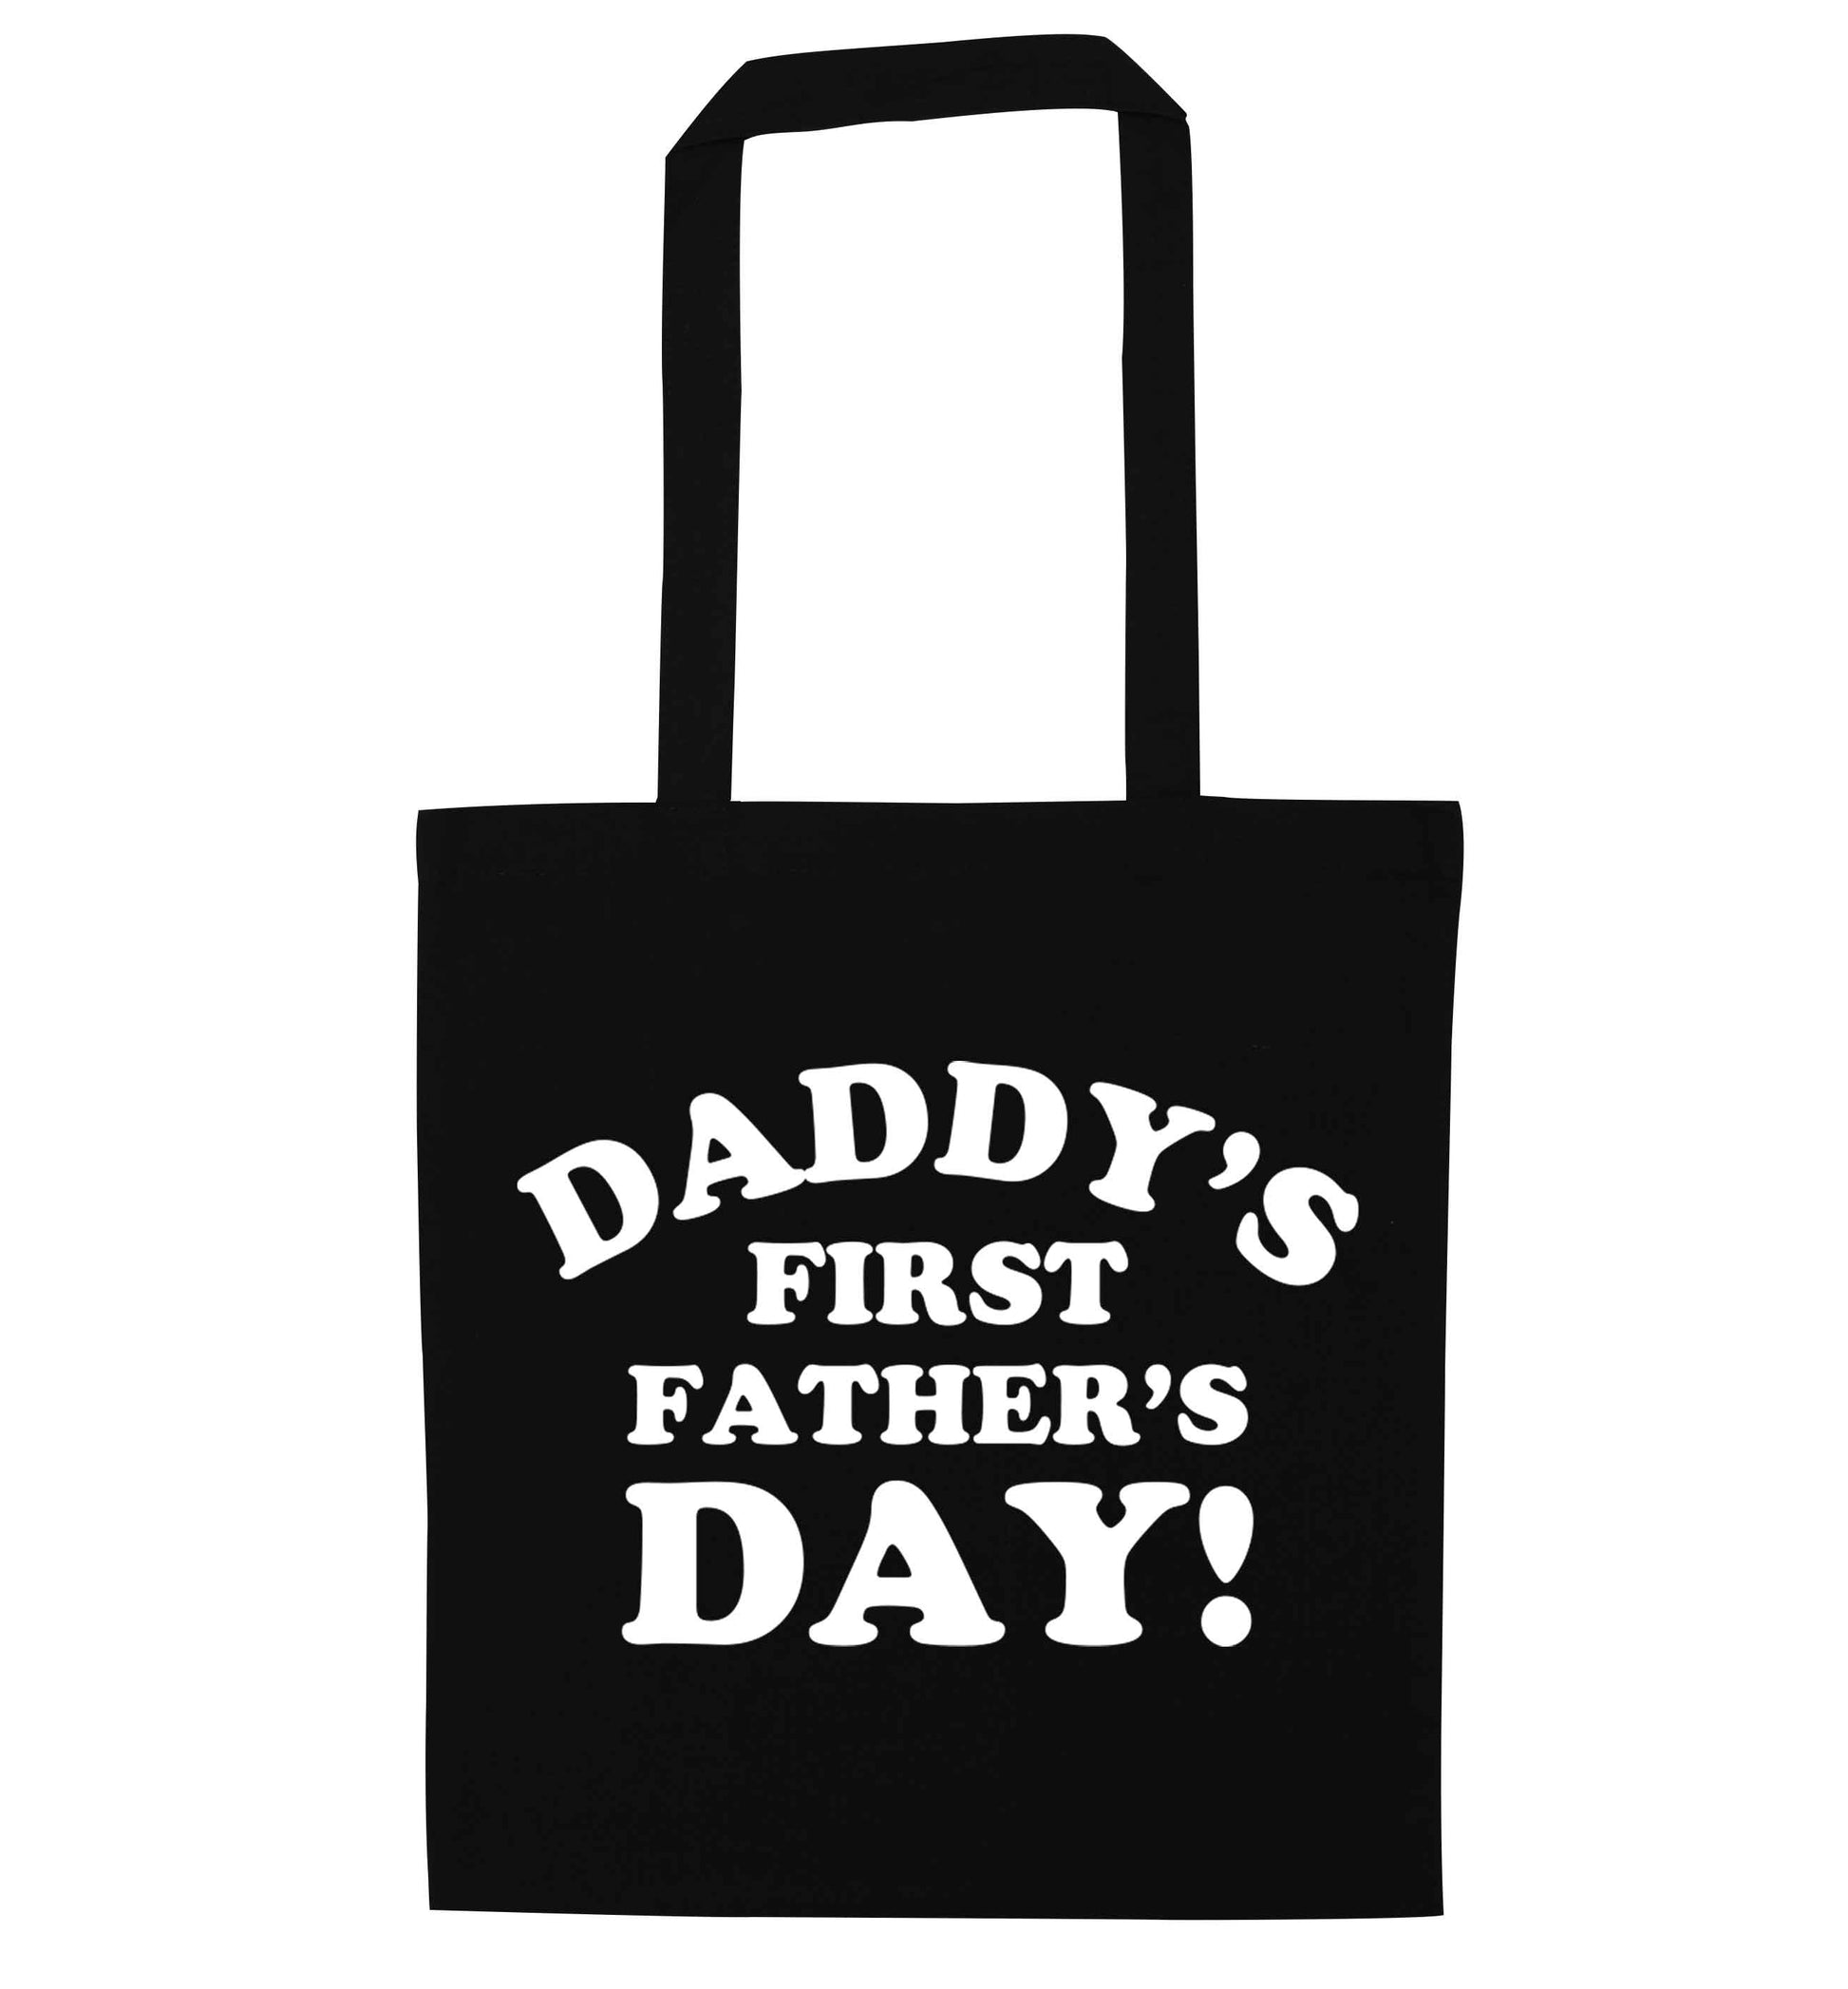 Daddy's first father's day black tote bag